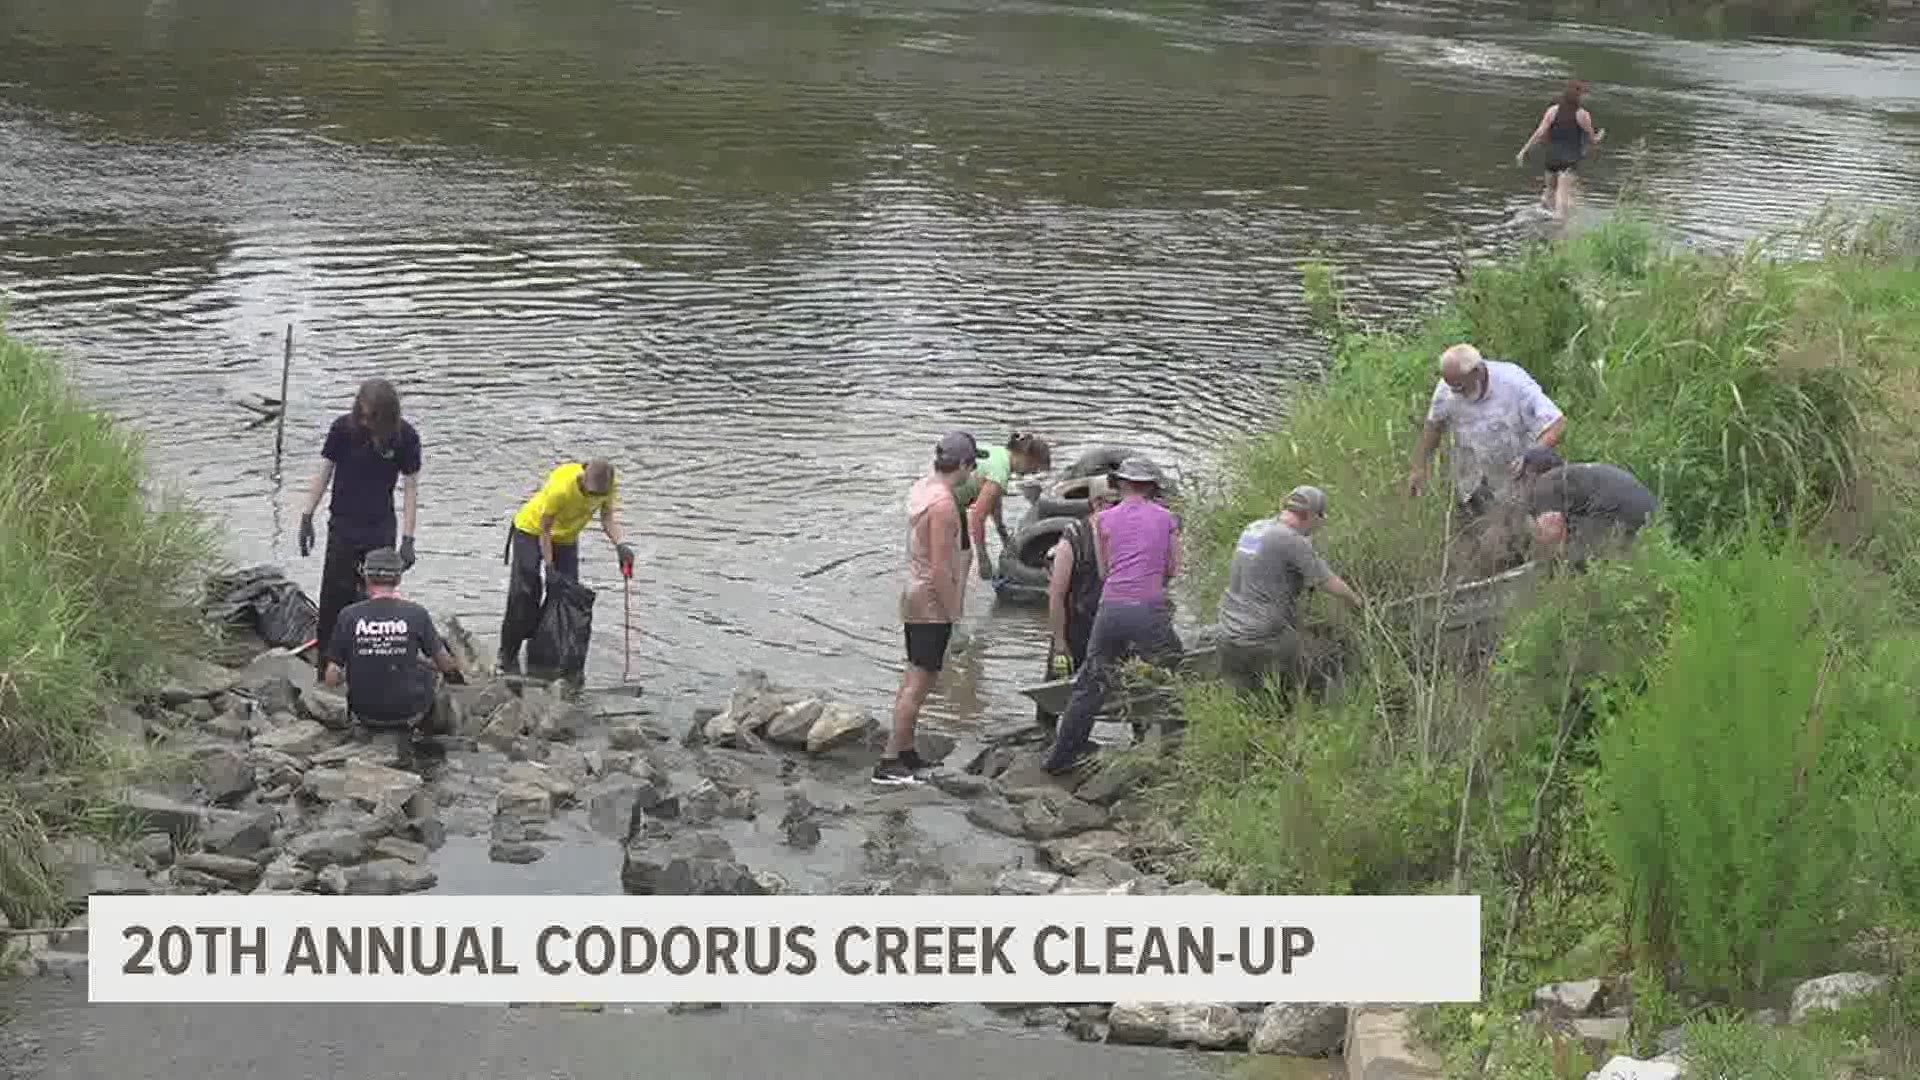 Teams spent hours cleaning up the Northeast extension of the Rail Trail along the creek.